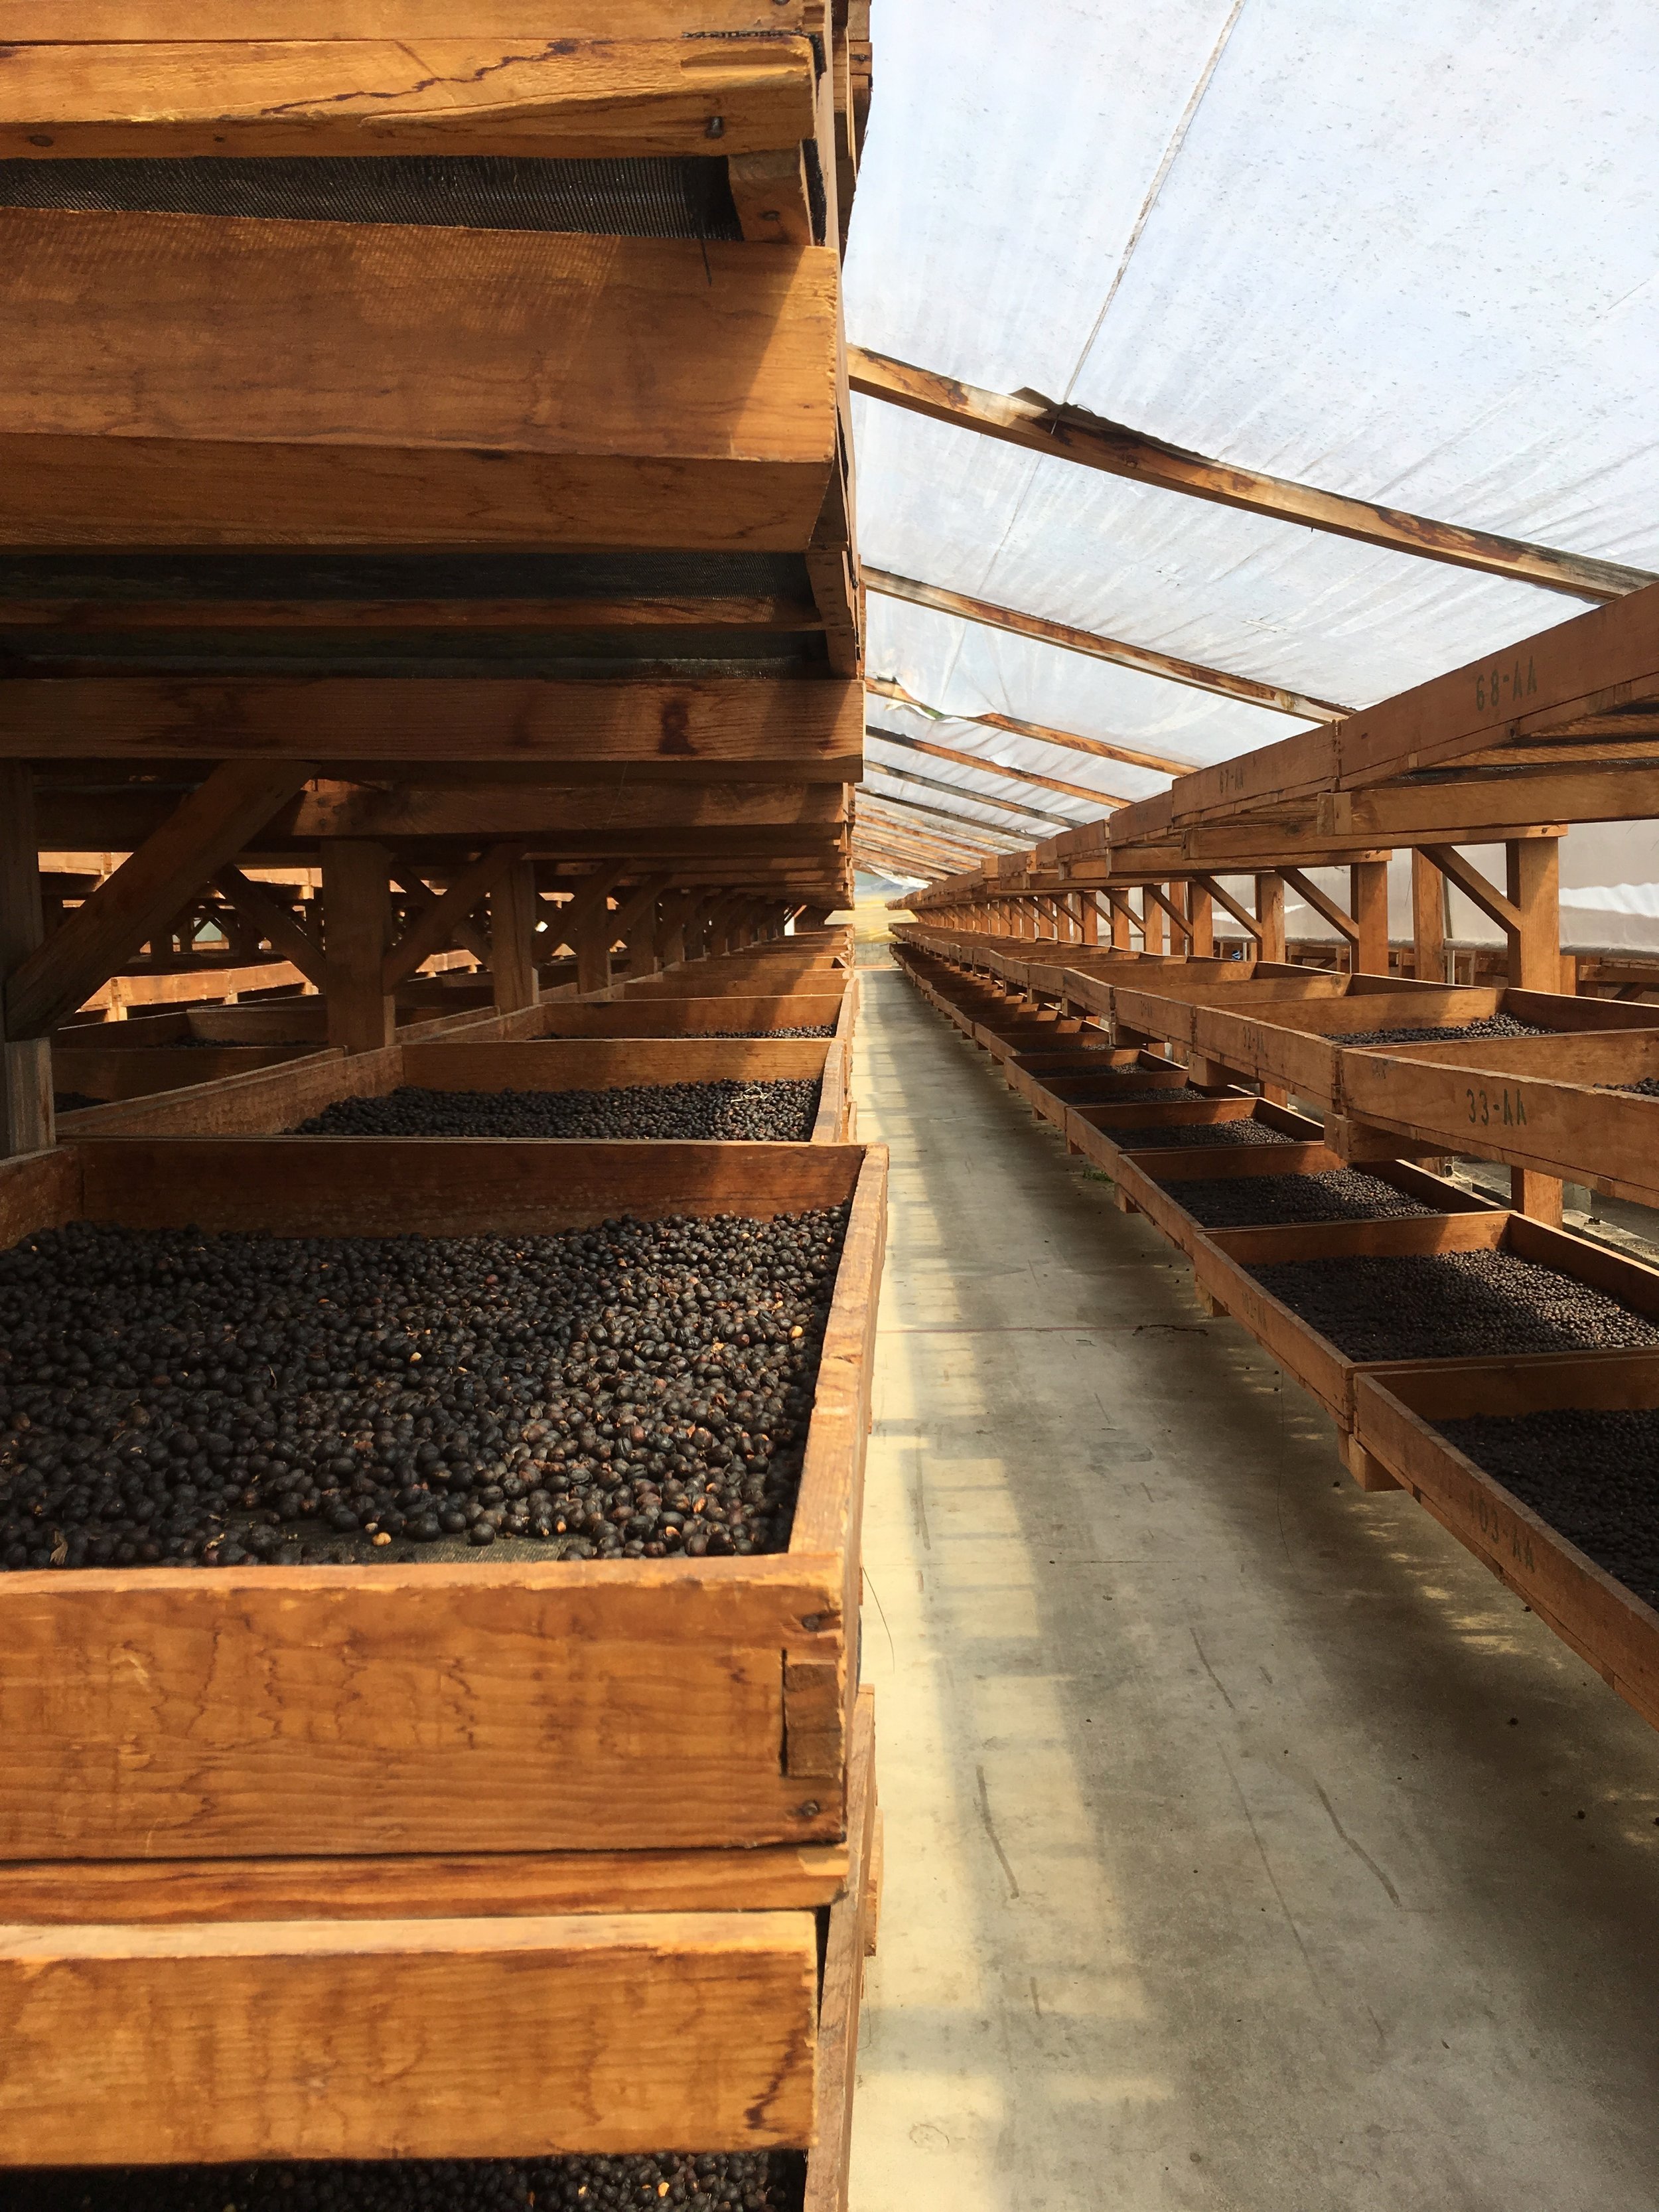 Raised drying beds of natural processed coffee.